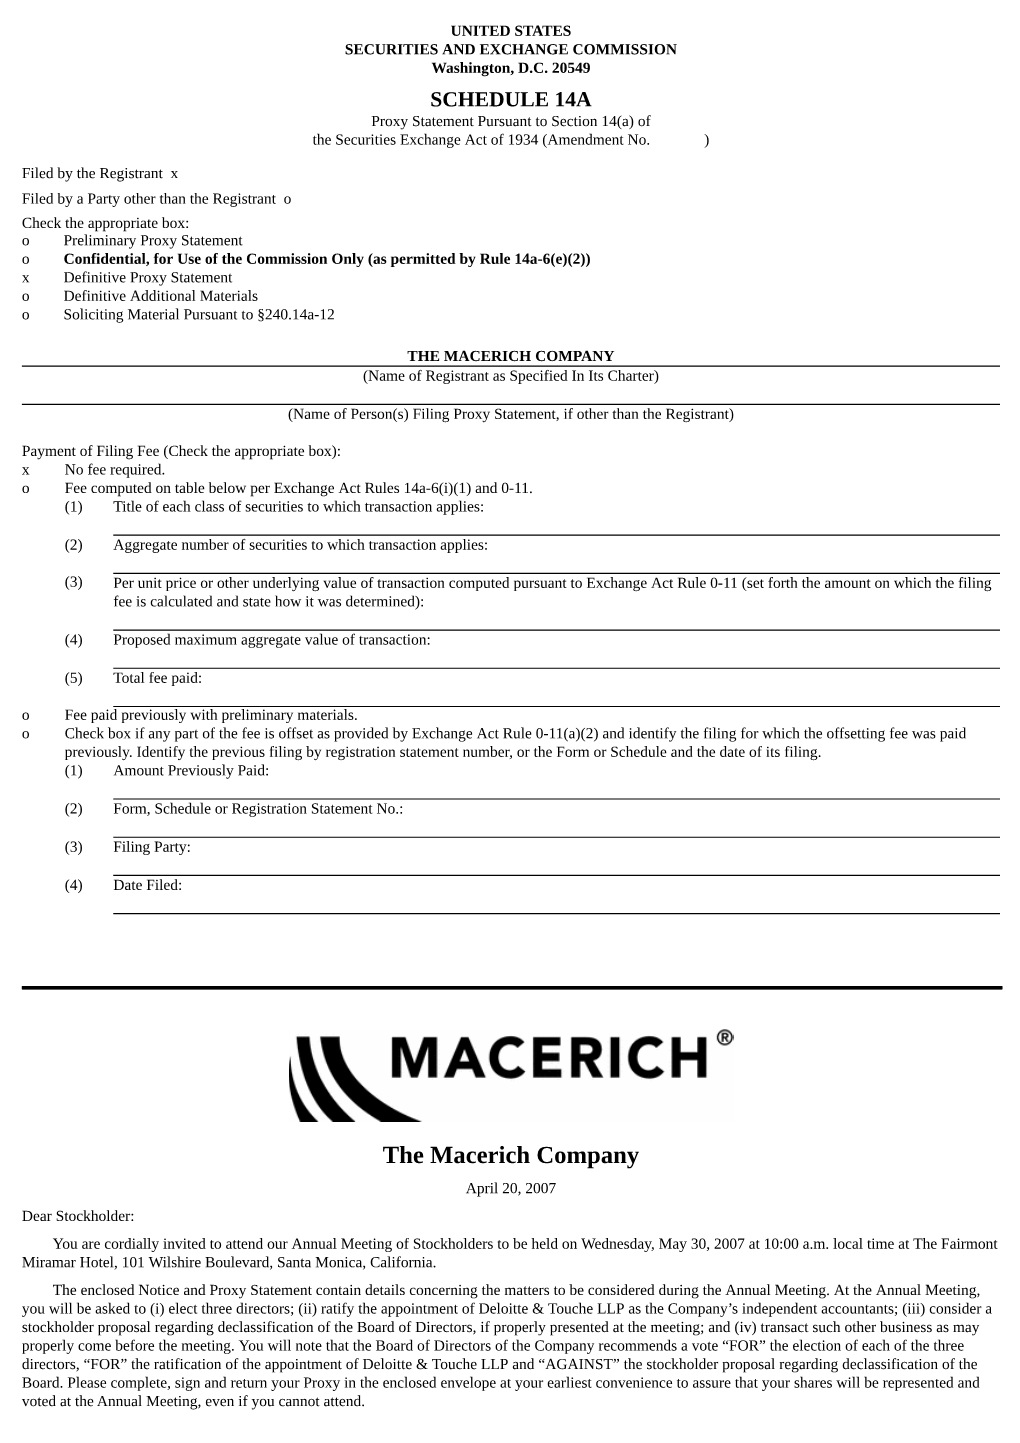 THE MACERICH COMPANY (Name of Registrant As Specified in Its Charter)